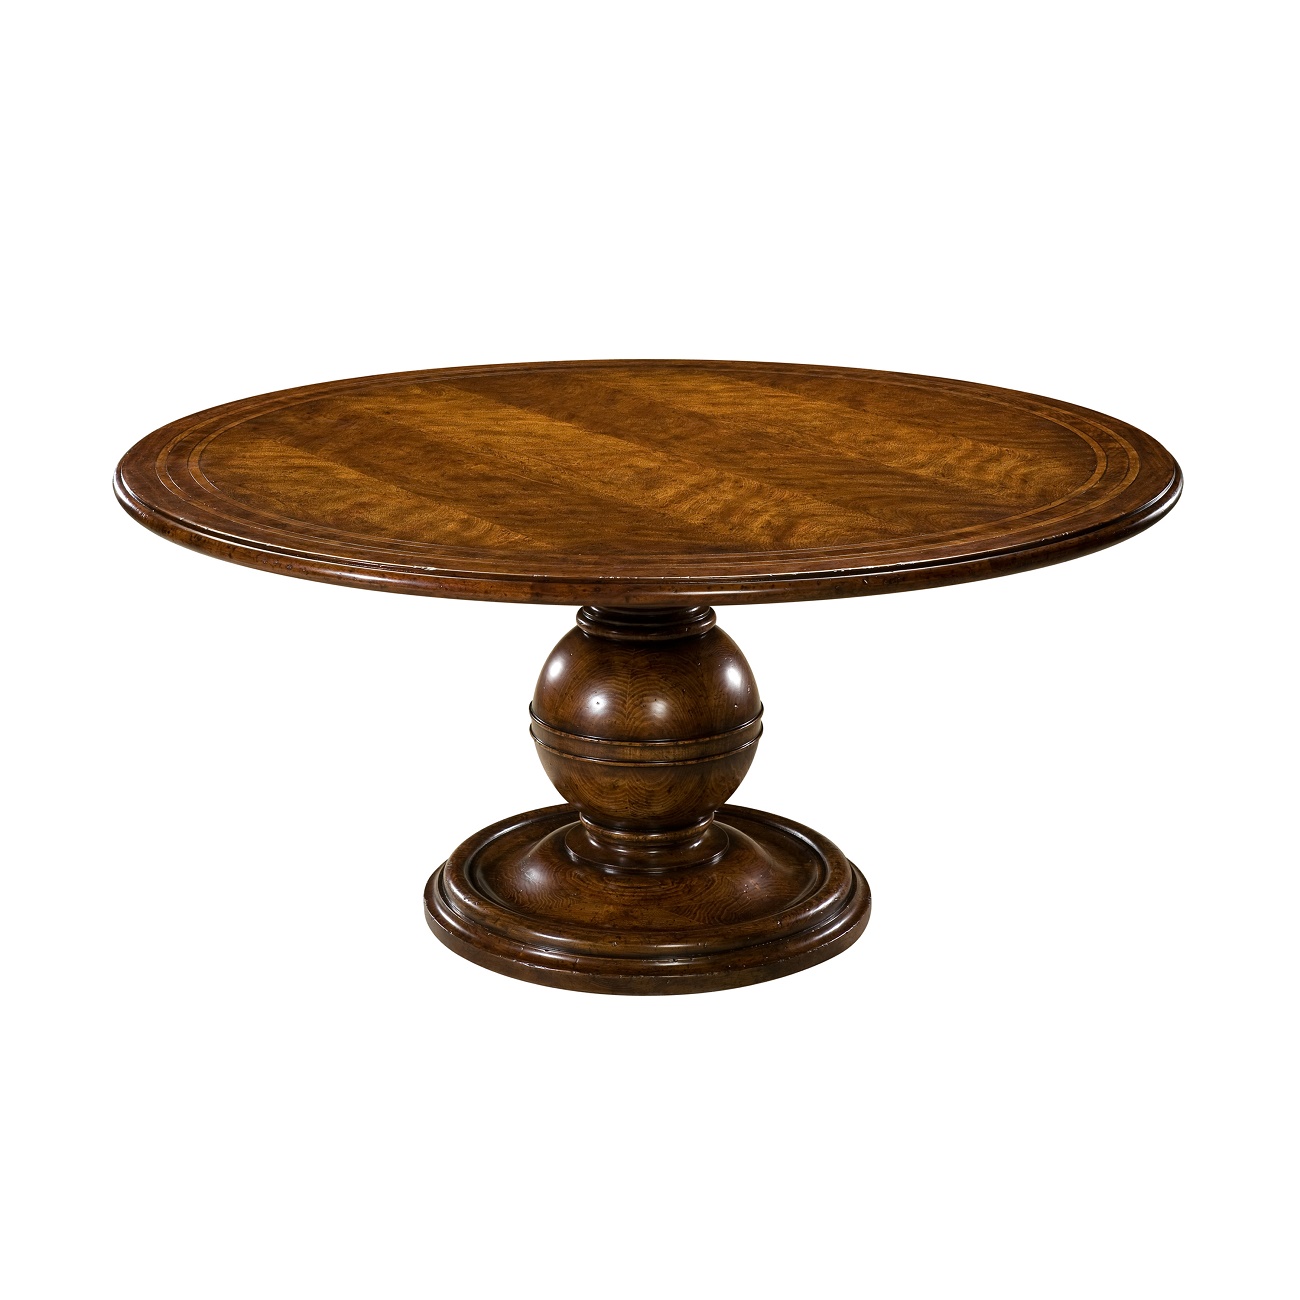 Diderot Dining Table, Theodore Alexander Dining Table Brooklyn, New York             